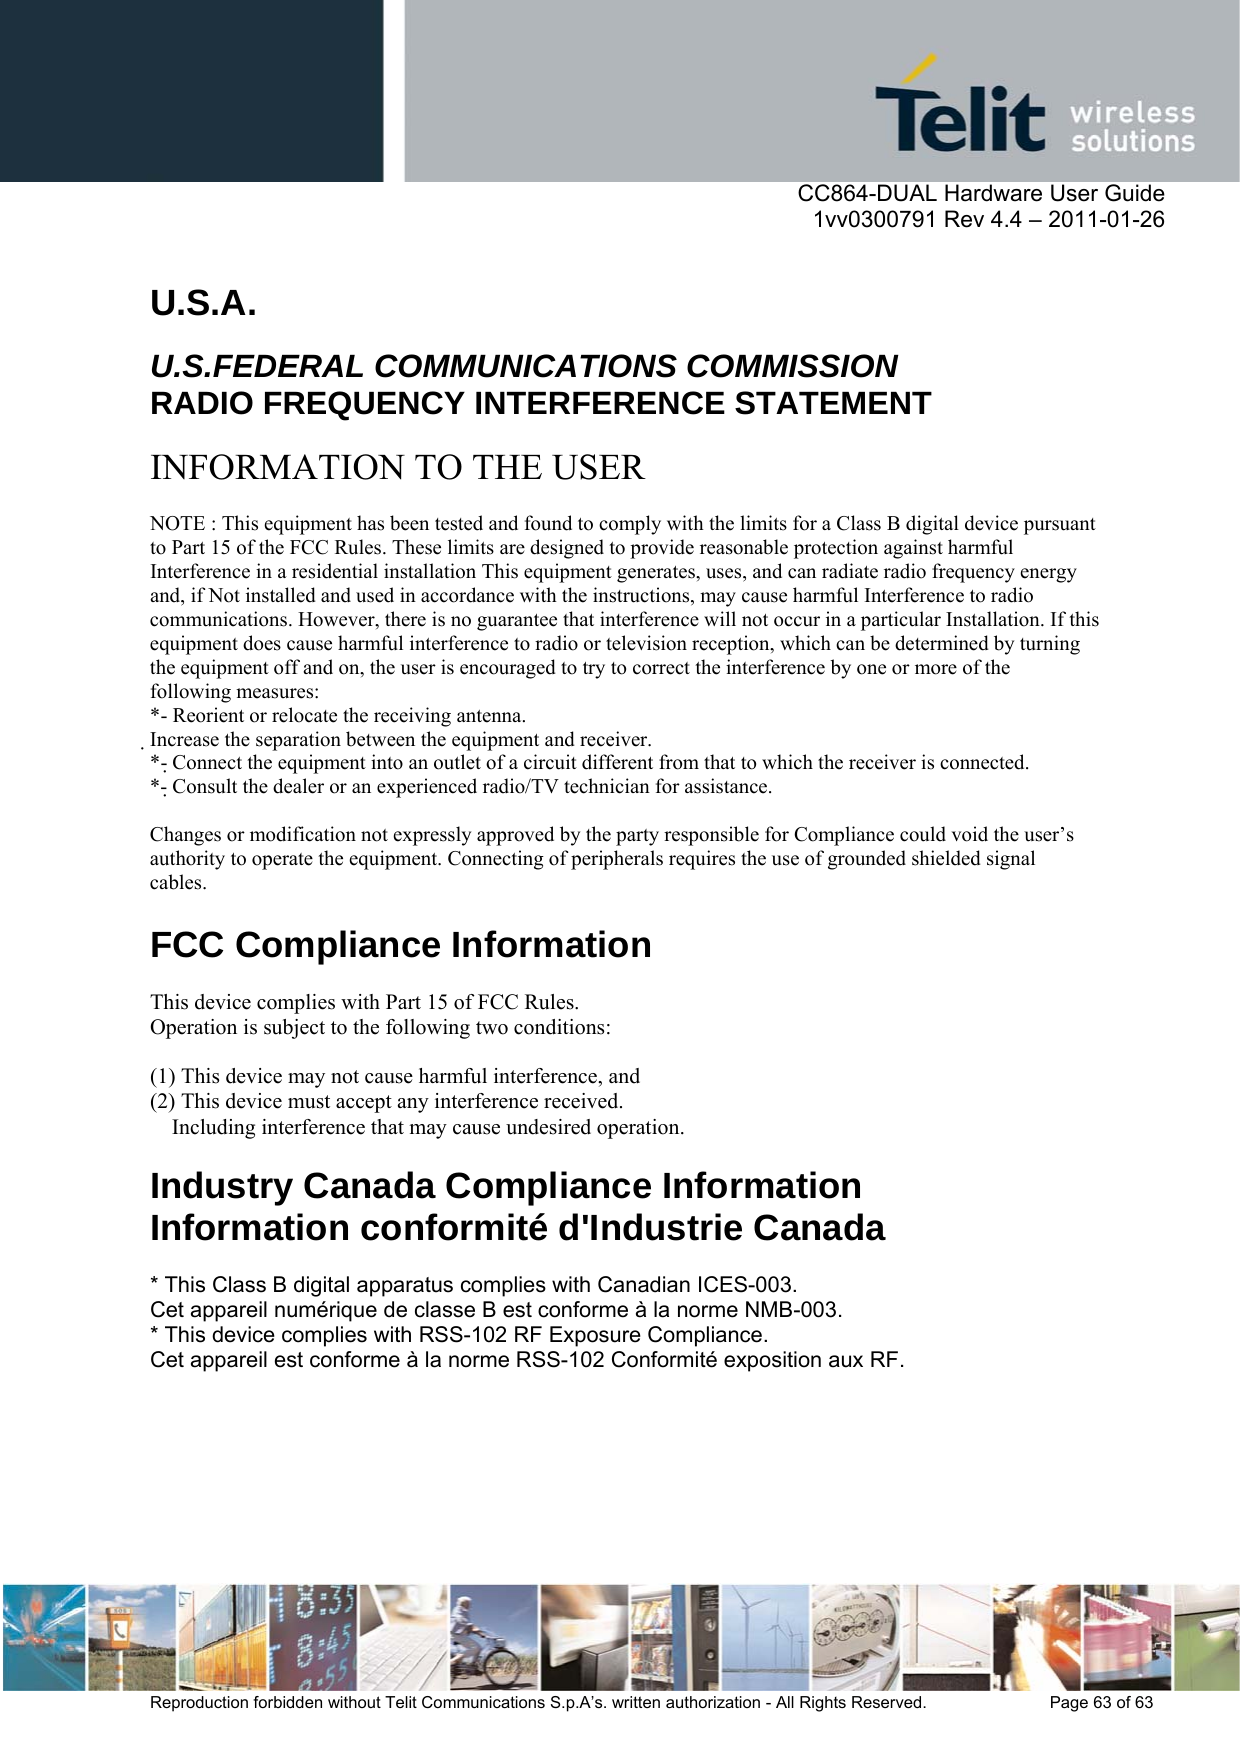      CC864-DUAL Hardware User Guide    1vv0300791 Rev 4.4 – 2011-01-26  Reproduction forbidden without Telit Communications S.p.A’s. written authorization - All Rights Reserved.    Page 63 of 63   U.S.A.  U.S.FEDERAL COMMUNICATIONS COMMISSION RADIO FREQUENCY INTERFERENCE STATEMENT  INFORMATION TO THE USER  NOTE : This equipment has been tested and found to comply with the limits for a Class B digital device pursuant to Part 15 of the FCC Rules. These limits are designed to provide reasonable protection against harmful Interference in a residential installation This equipment generates, uses, and can radiate radio frequency energy and, if Not installed and used in accordance with the instructions, may cause harmful Interference to radio communications. However, there is no guarantee that interference will not occur in a particular Installation. If this equipment does cause harmful interference to radio or television reception, which can be determined by turning the equipment off and on, the user is encouraged to try to correct the interference by one or more of the following measures: *- Reorient or relocate the receiving antenna. Increase the separation between the equipment and receiver. *- Connect the equipment into an outlet of a circuit different from that to which the receiver is connected. *- Consult the dealer or an experienced radio/TV technician for assistance.  Changes or modification not expressly approved by the party responsible for Compliance could void the user’s authority to operate the equipment. Connecting of peripherals requires the use of grounded shielded signal cables.  FCC Compliance Information  This device complies with Part 15 of FCC Rules. Operation is subject to the following two conditions:  (1) This device may not cause harmful interference, and (2) This device must accept any interference received. Including interference that may cause undesired operation.  Industry Canada Compliance Information Information conformité d&apos;Industrie Canada  * This Class B digital apparatus complies with Canadian ICES-003. Cet appareil numérique de classe B est conforme à la norme NMB-003. * This device complies with RSS-102 RF Exposure Compliance. Cet appareil est conforme à la norme RSS-102 Conformité exposition aux RF.  